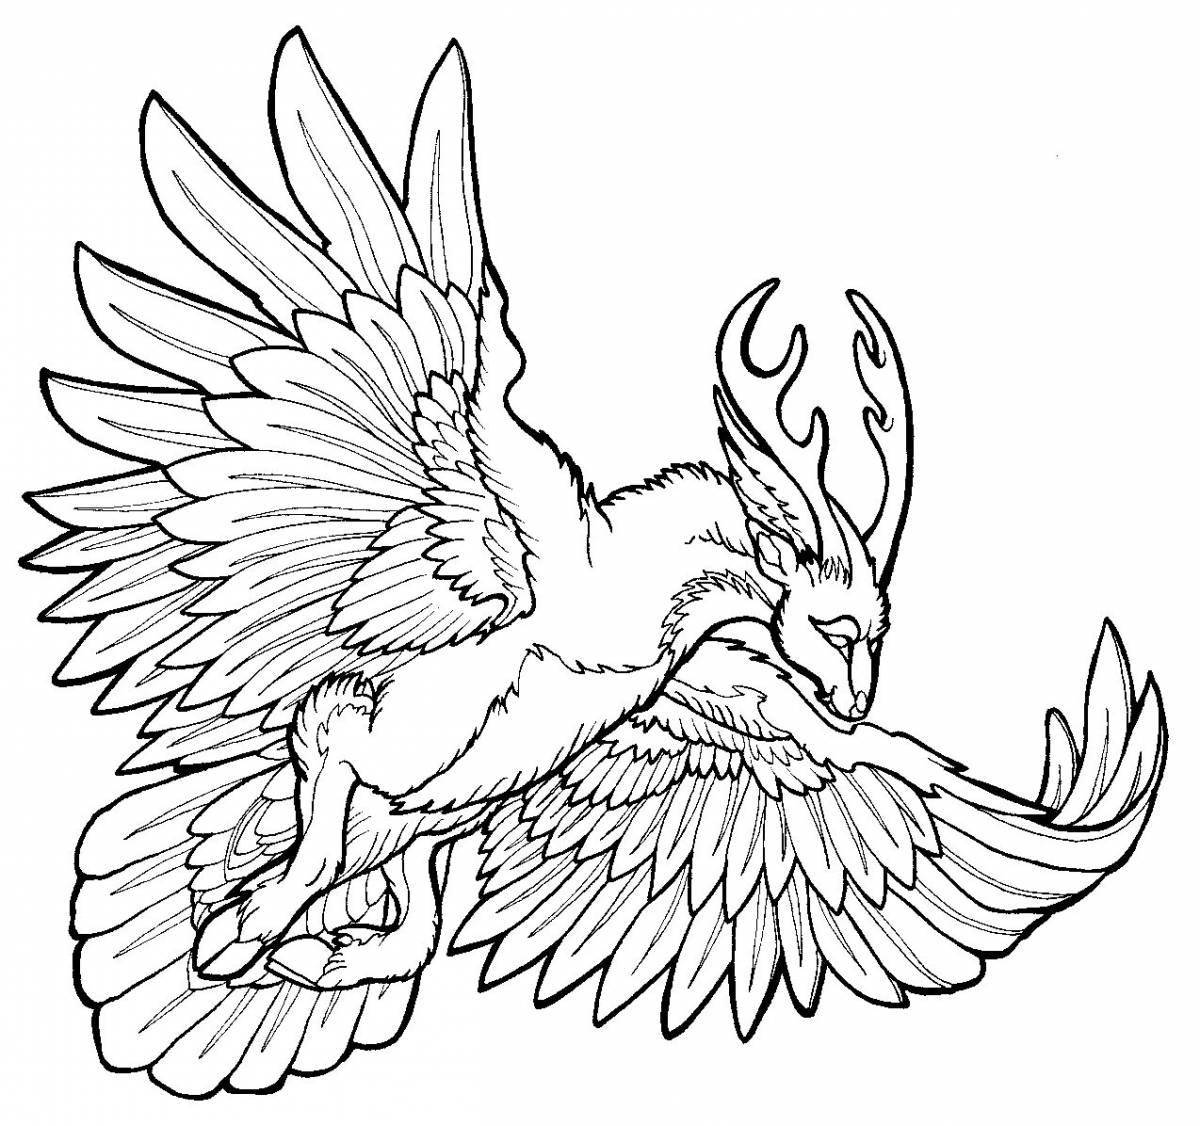 Extraordinary coloring pages magical creatures